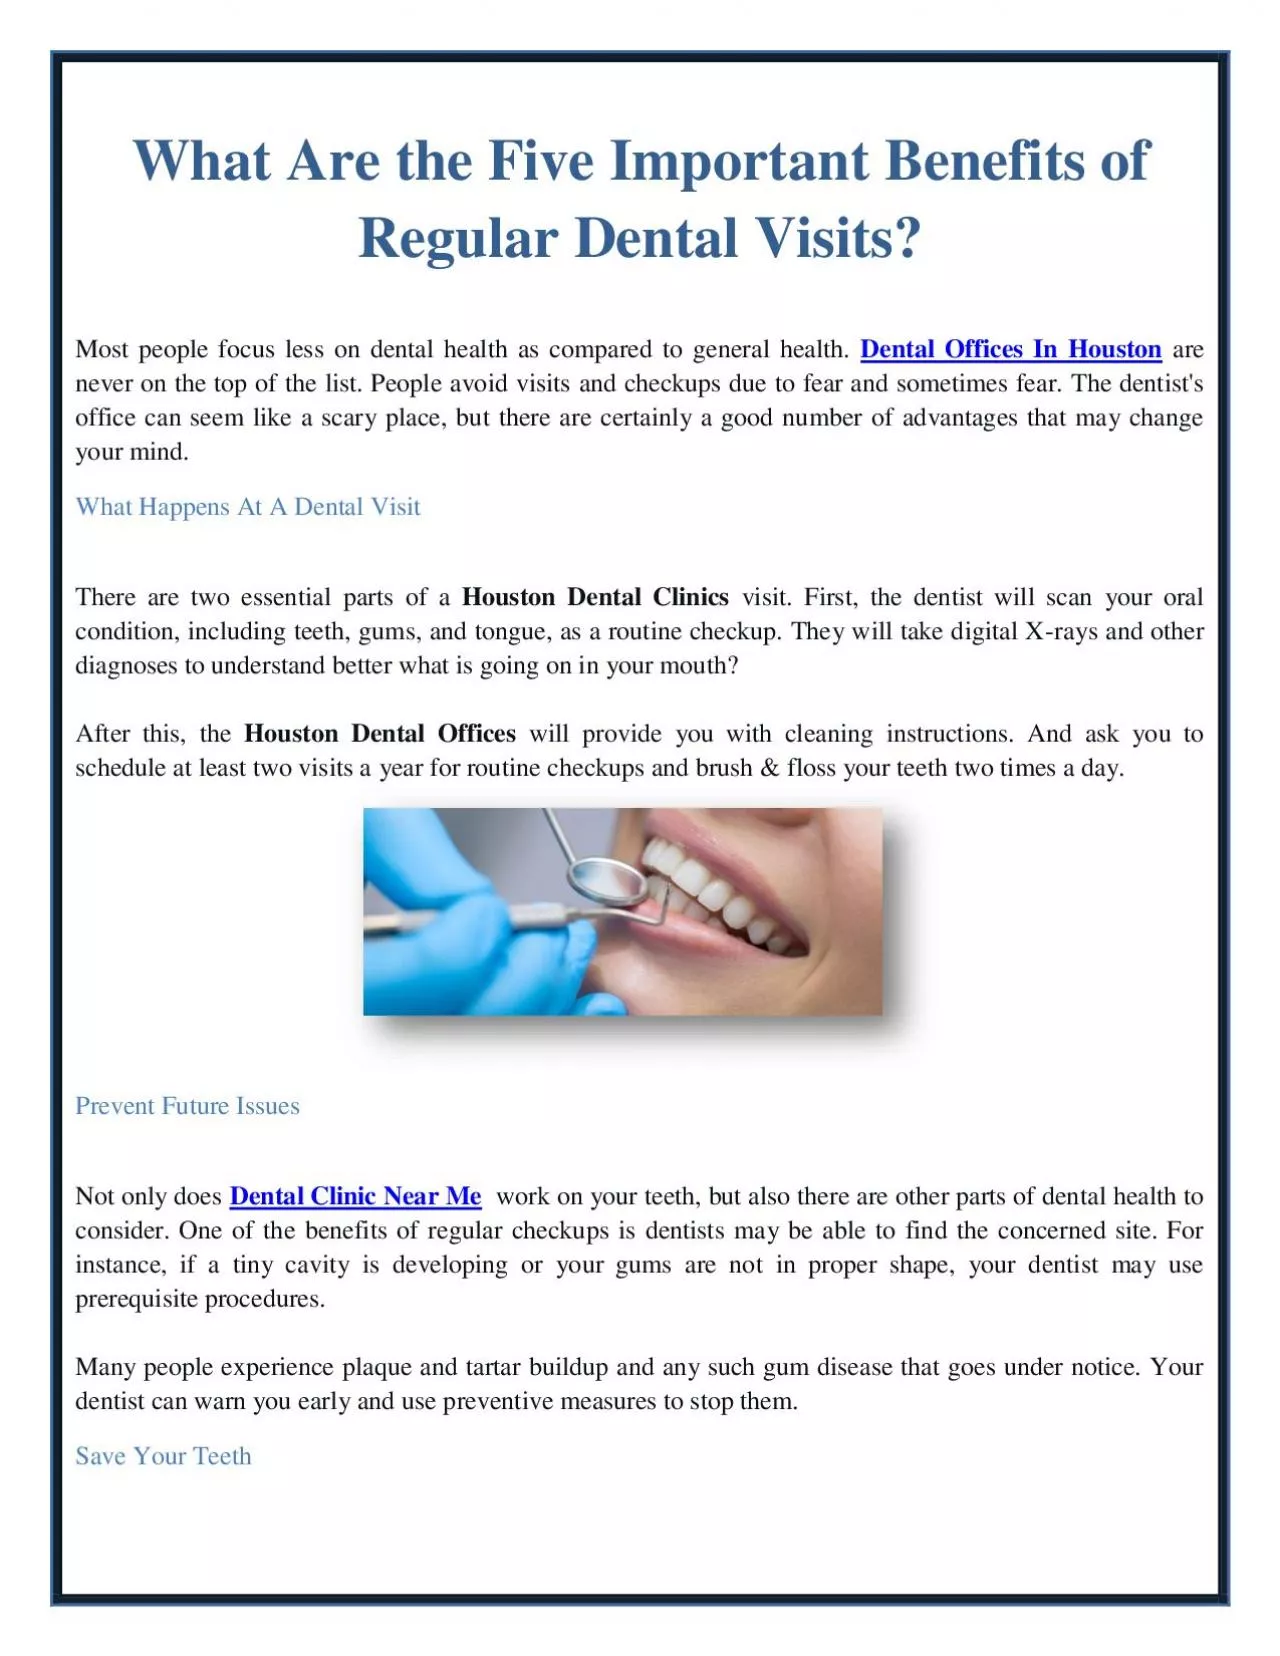 What Are the Five Important Benefits of Regular Dental Visits?